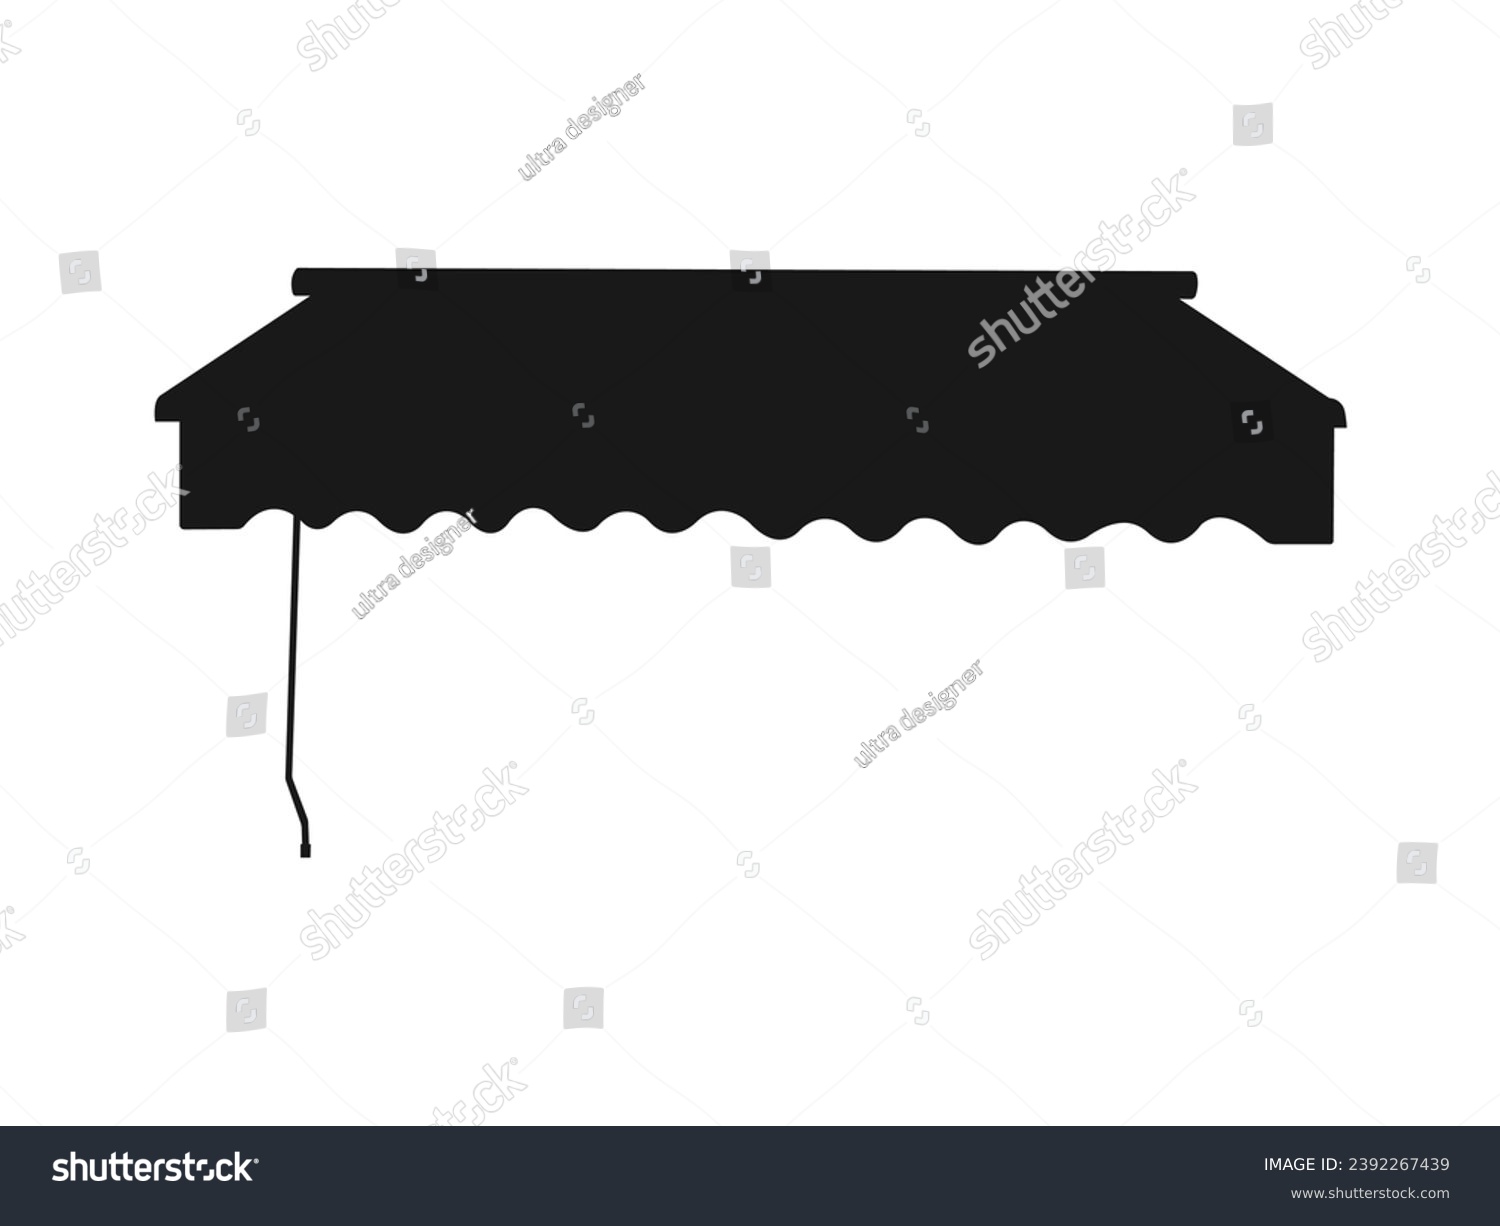 SVG of Realistic striped store sunshade awning, shop canopy. Black and white market umbrella. Cafe or restaurant exterior shade elements. Cafe sunshade, store awning or roof with red and white isolated. svg